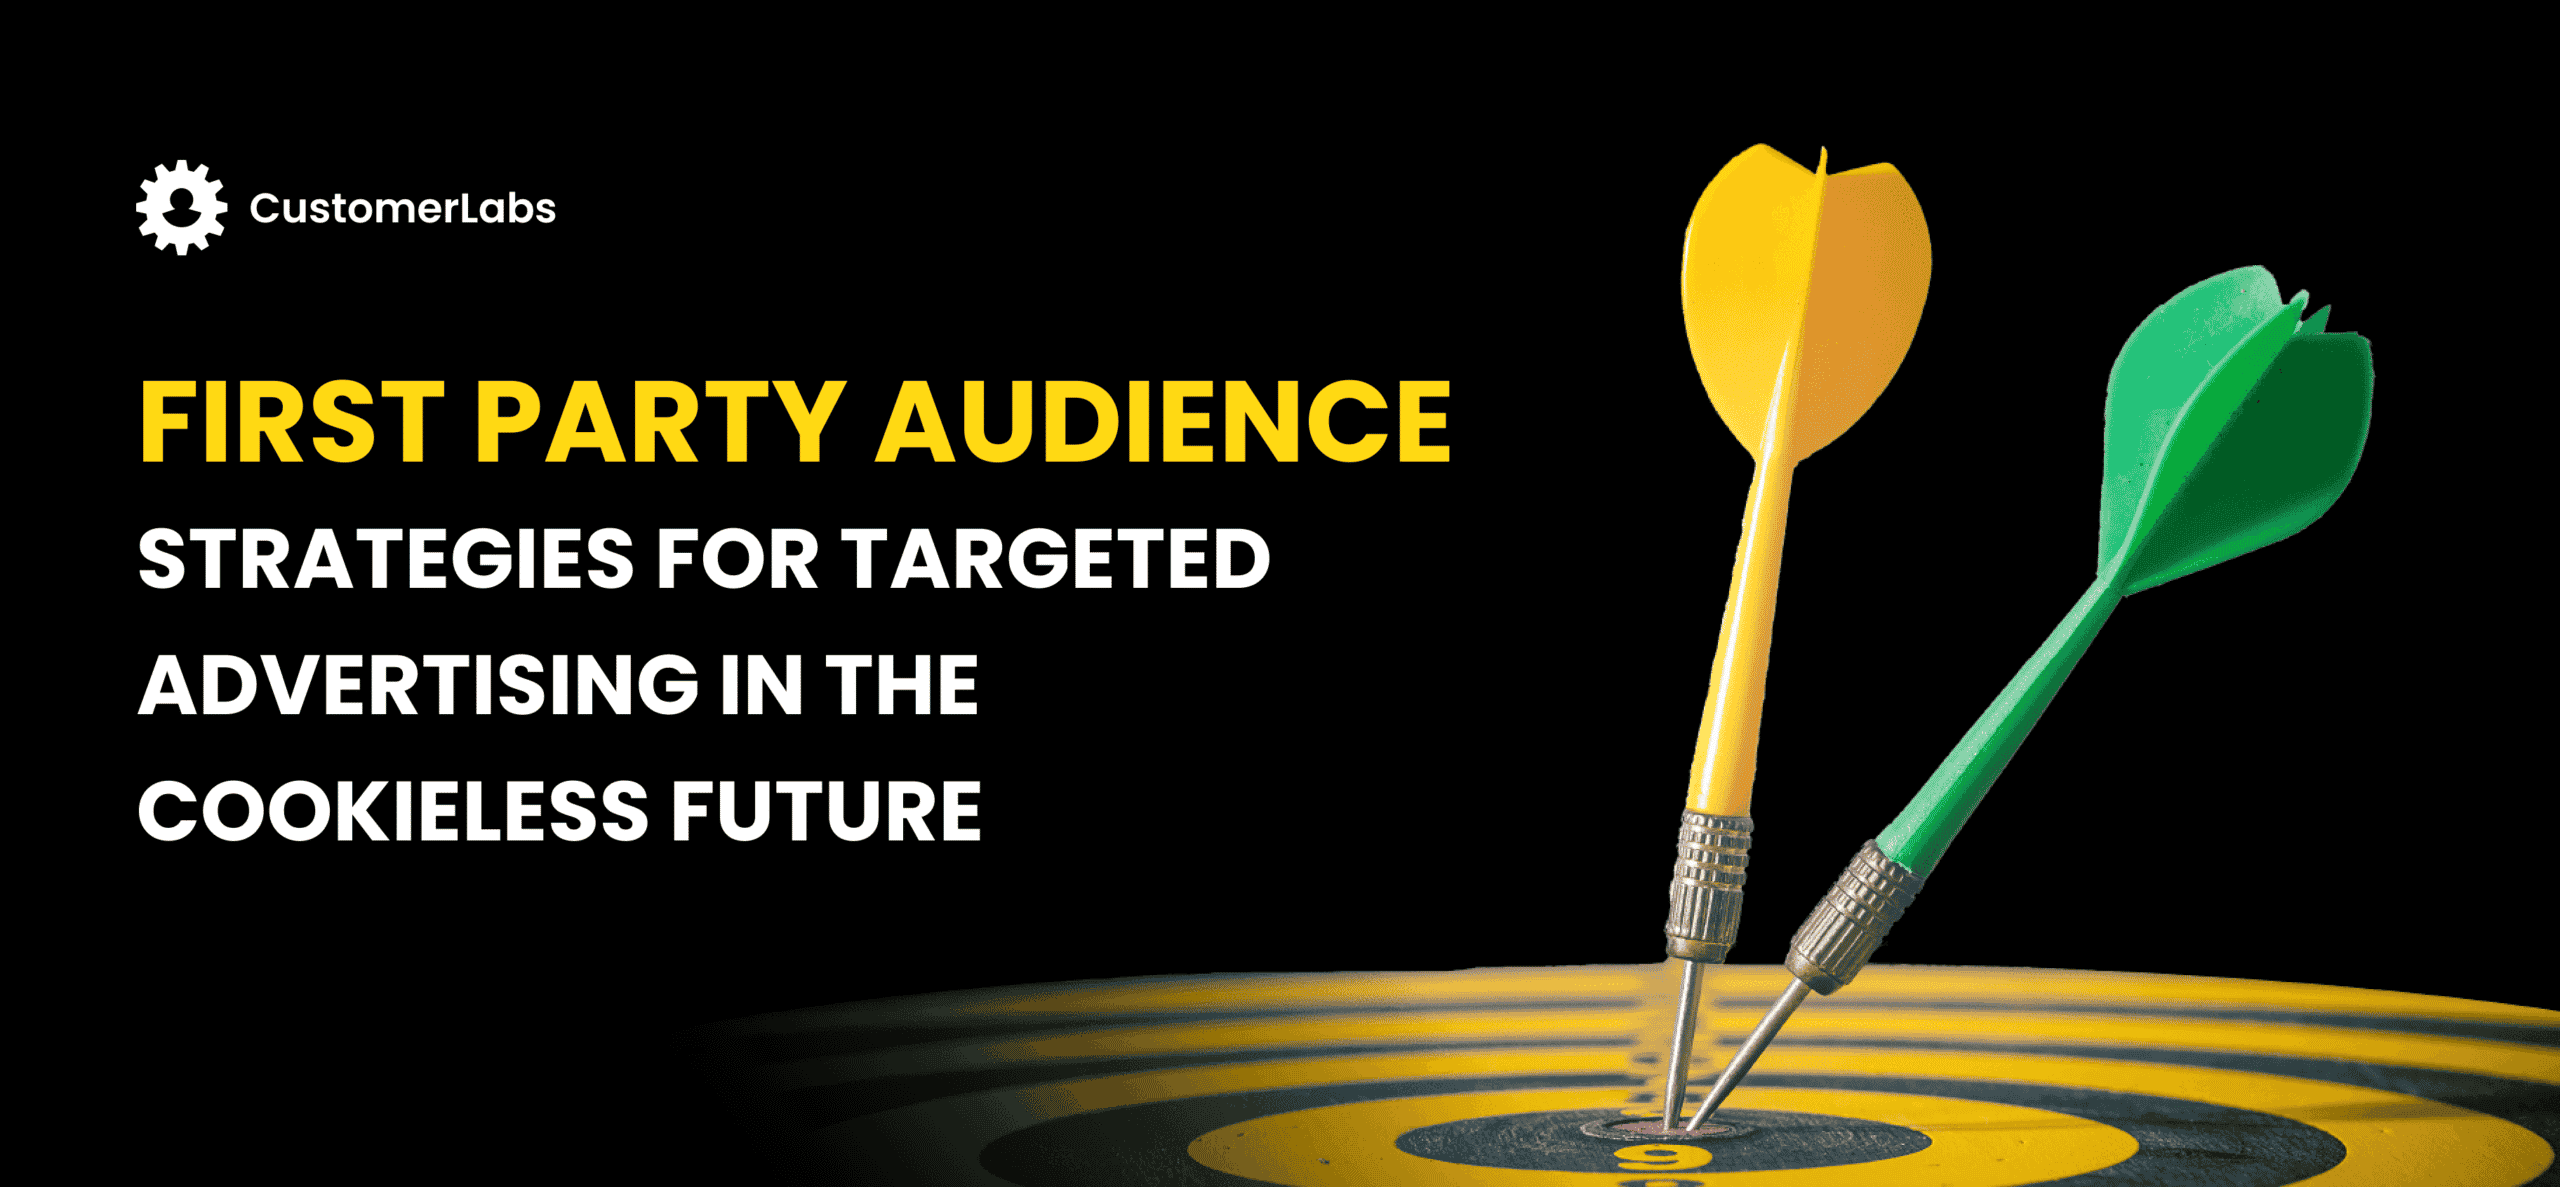 First party data strategies for targeted advertising in the cookieless future